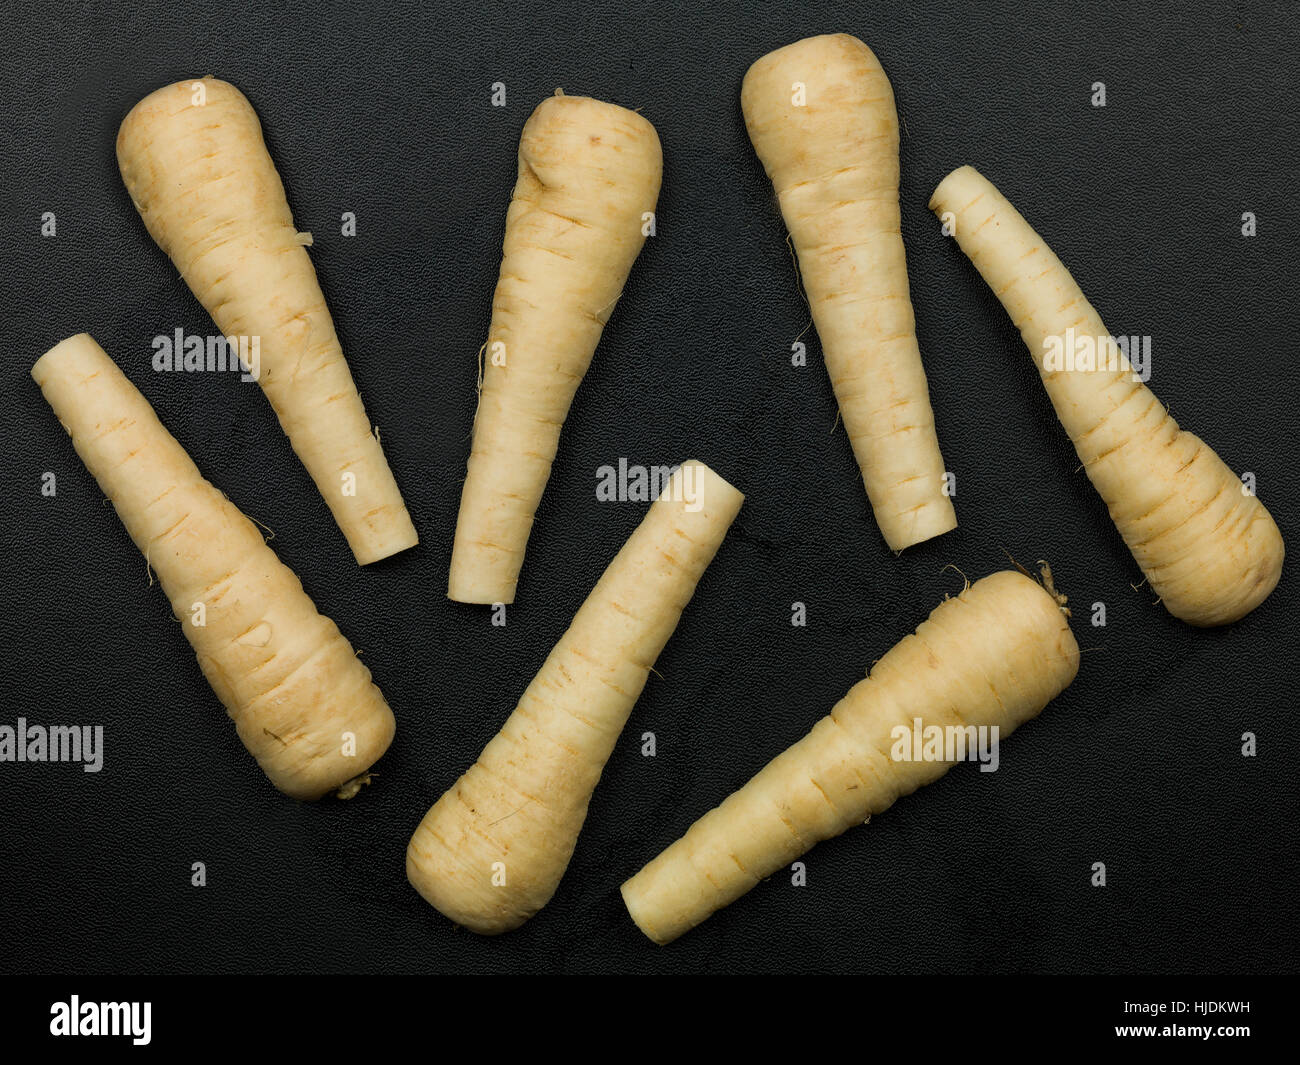 Fresh Uncooked Parsnips Cooking Ingredients Stock Photo